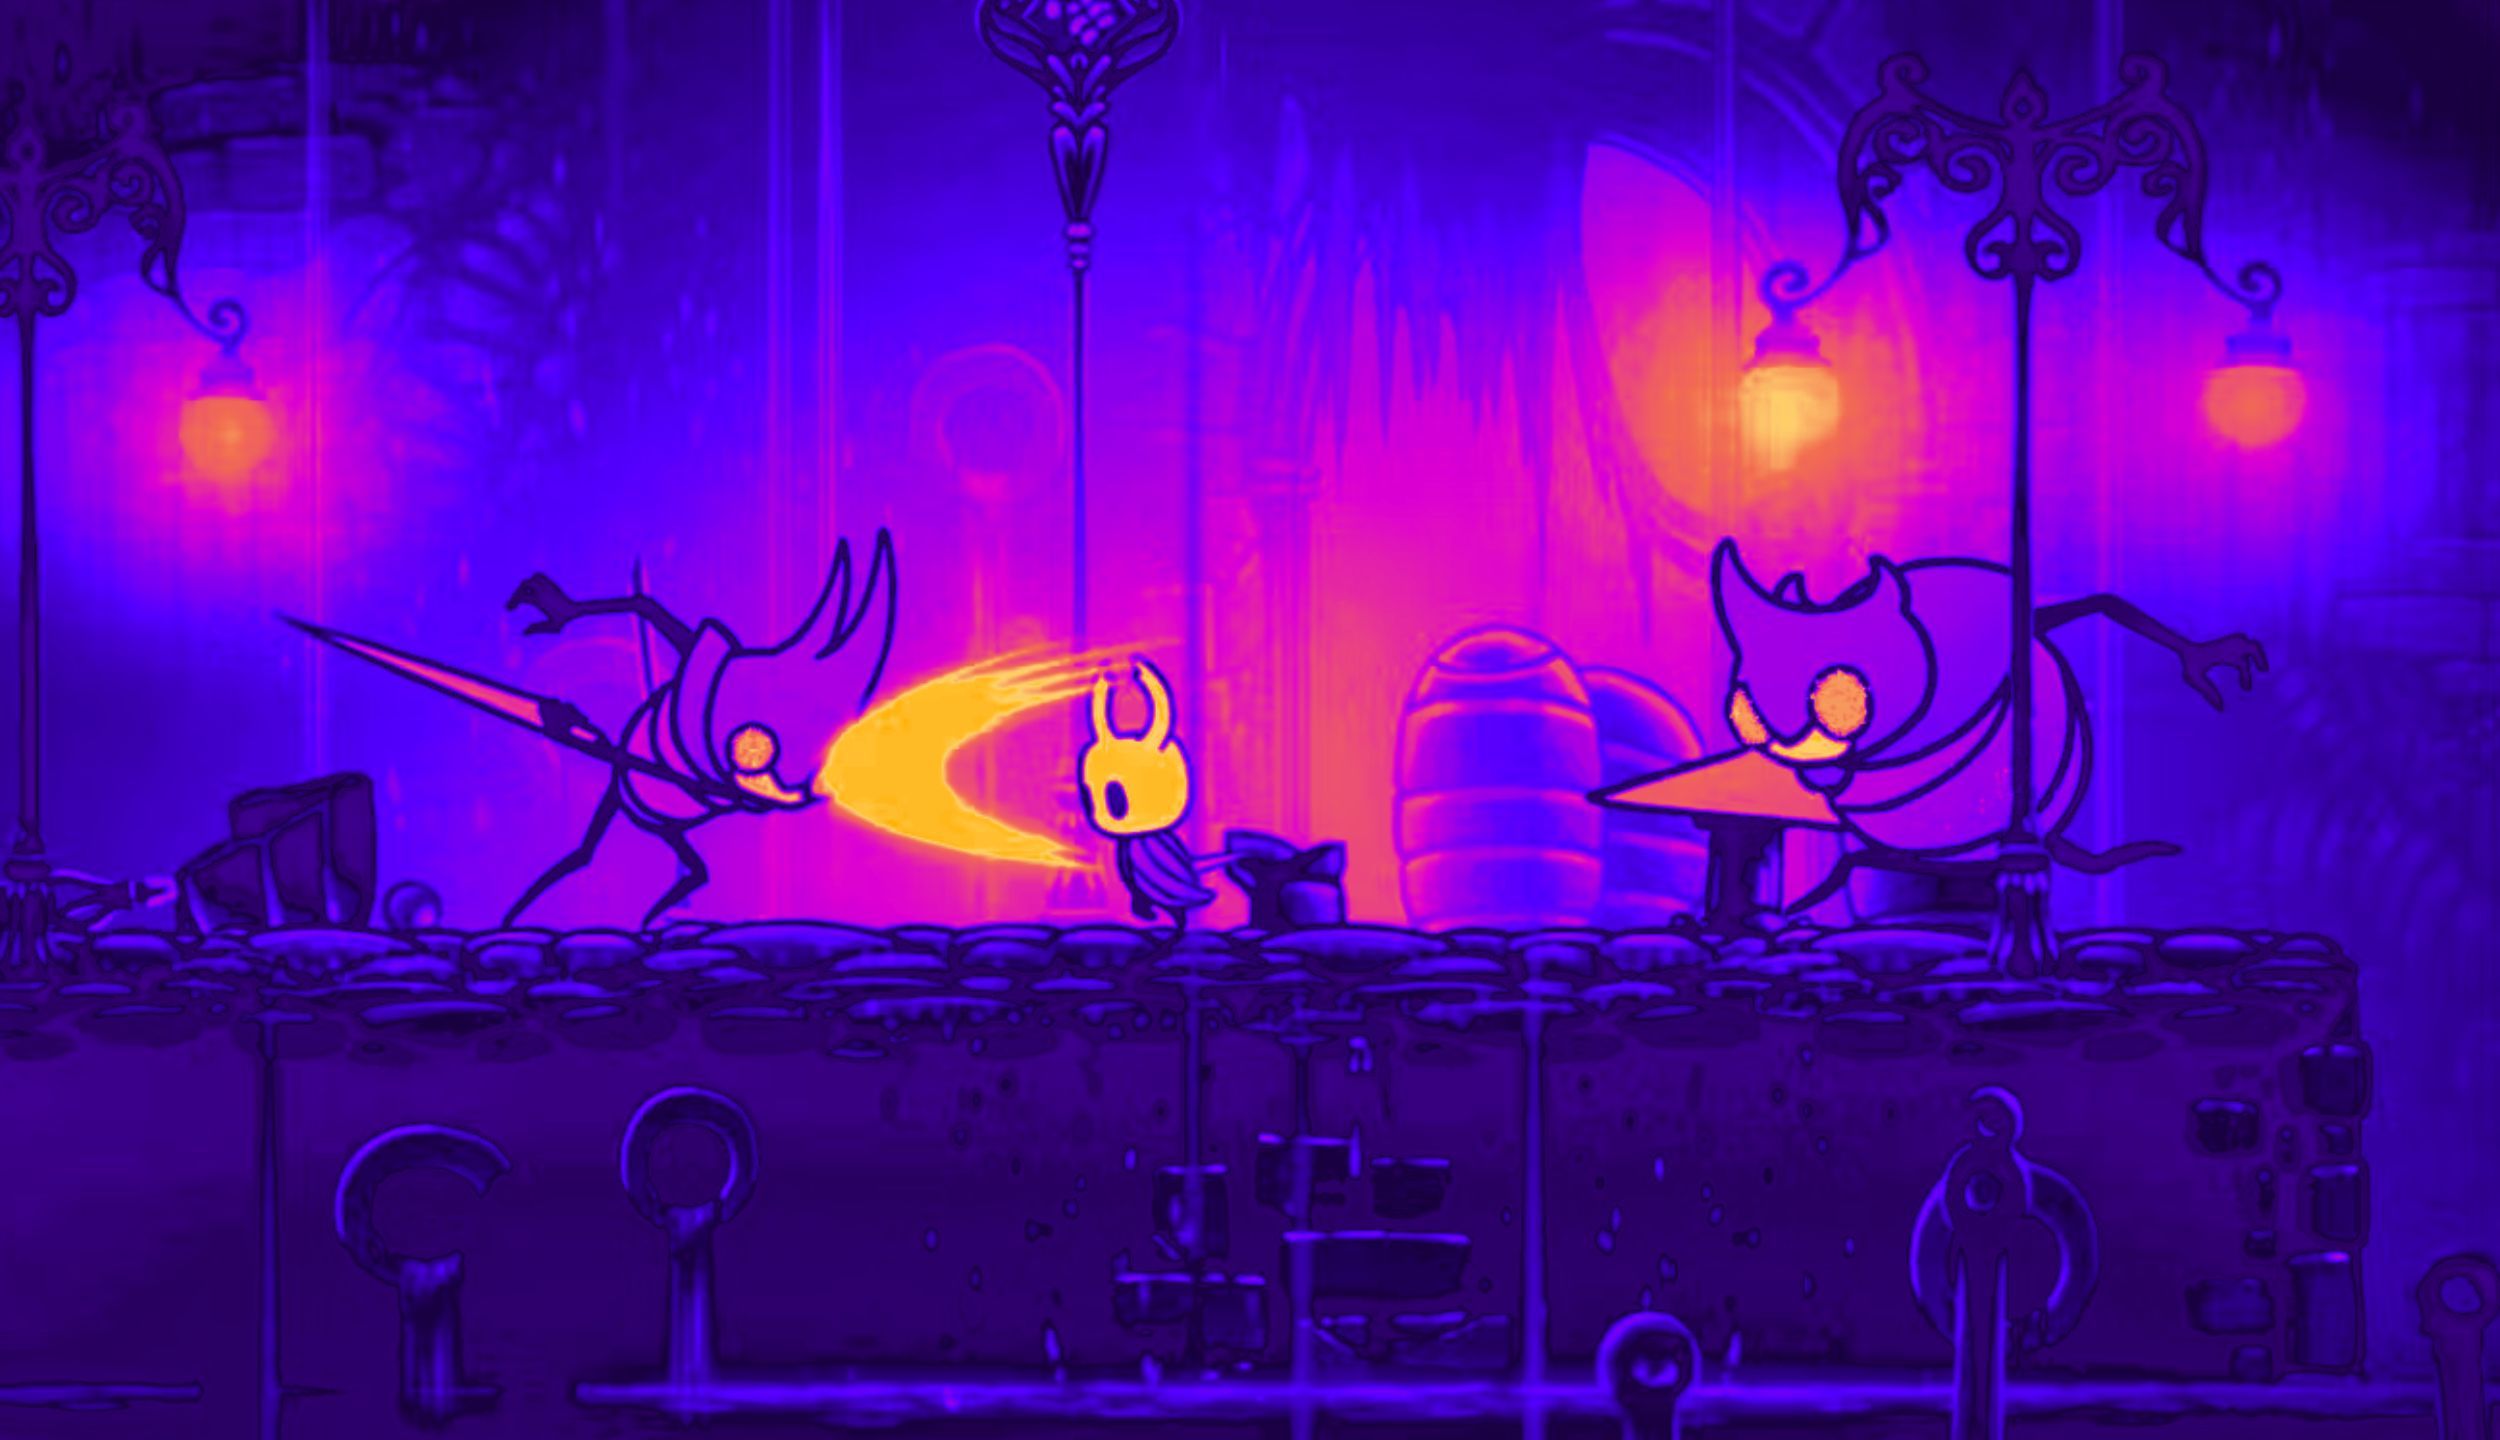 6 epic Metroidvania games that will keep you playing for hours